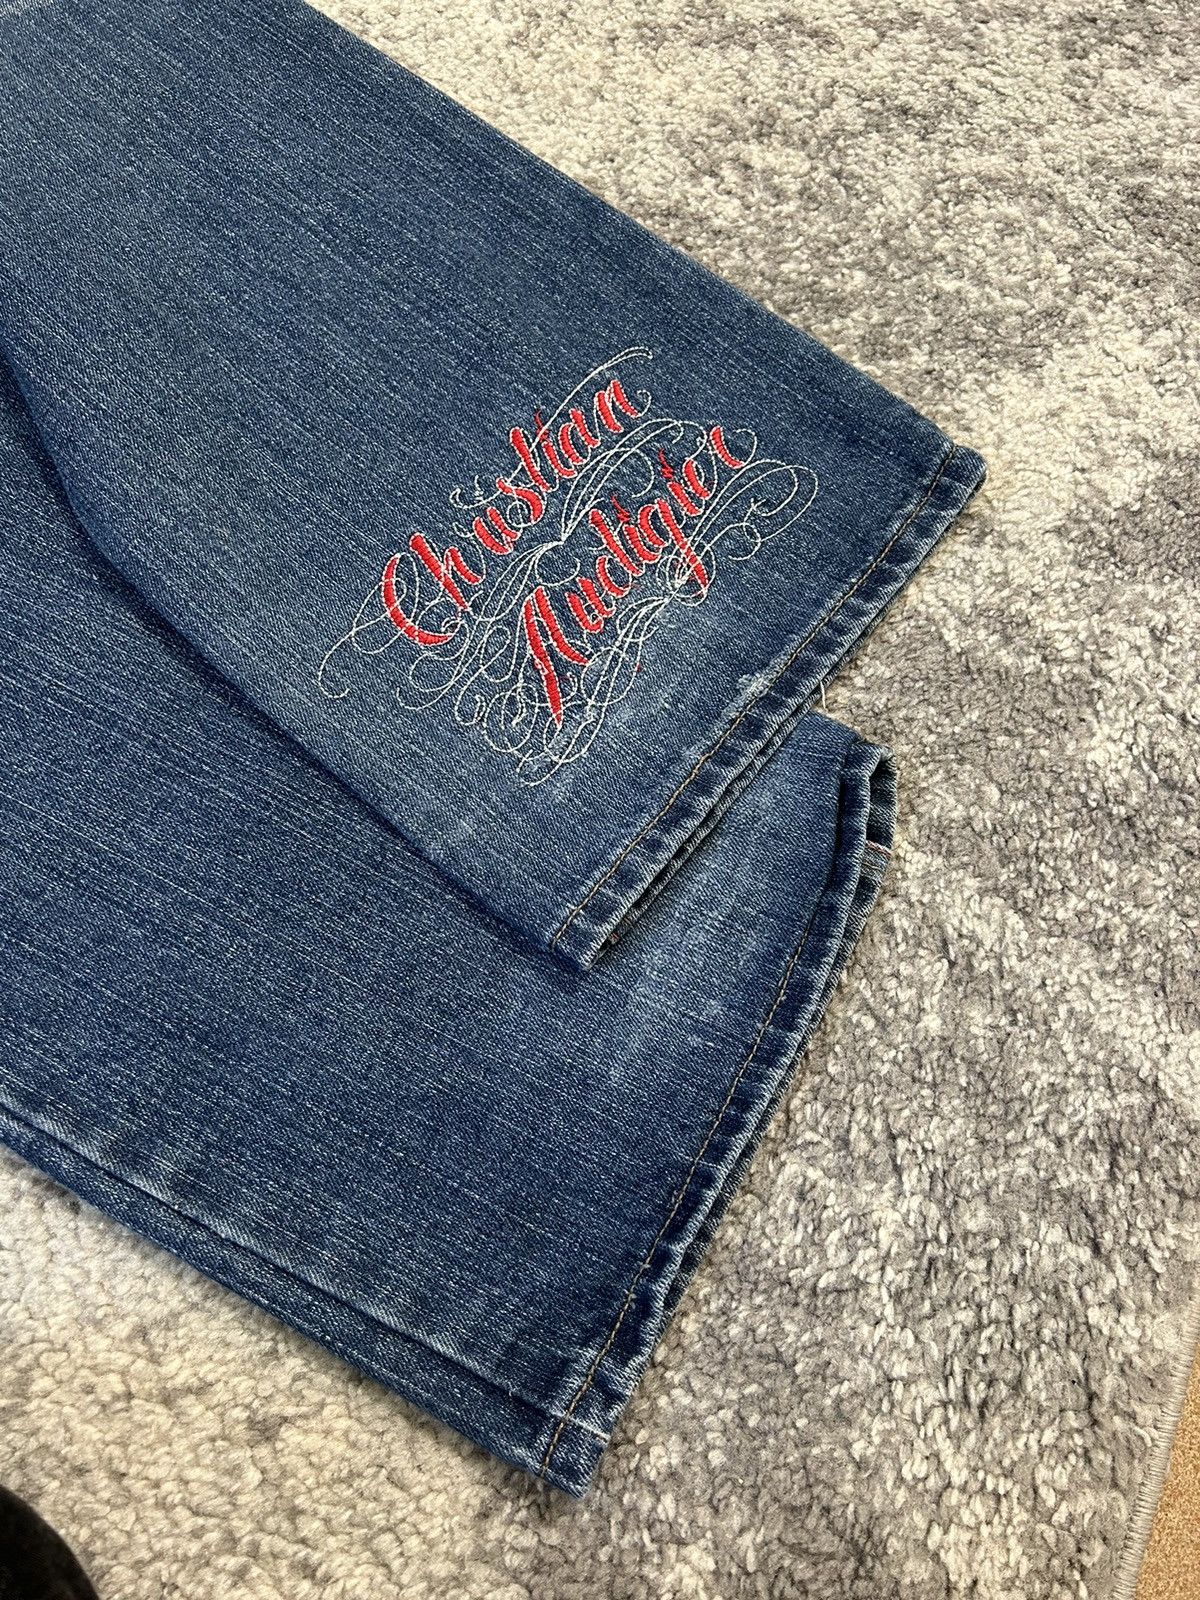 Christian Audigier 2000s Christian Audigier Embroidered Jeans Size US 34 / EU 50 - 9 Preview